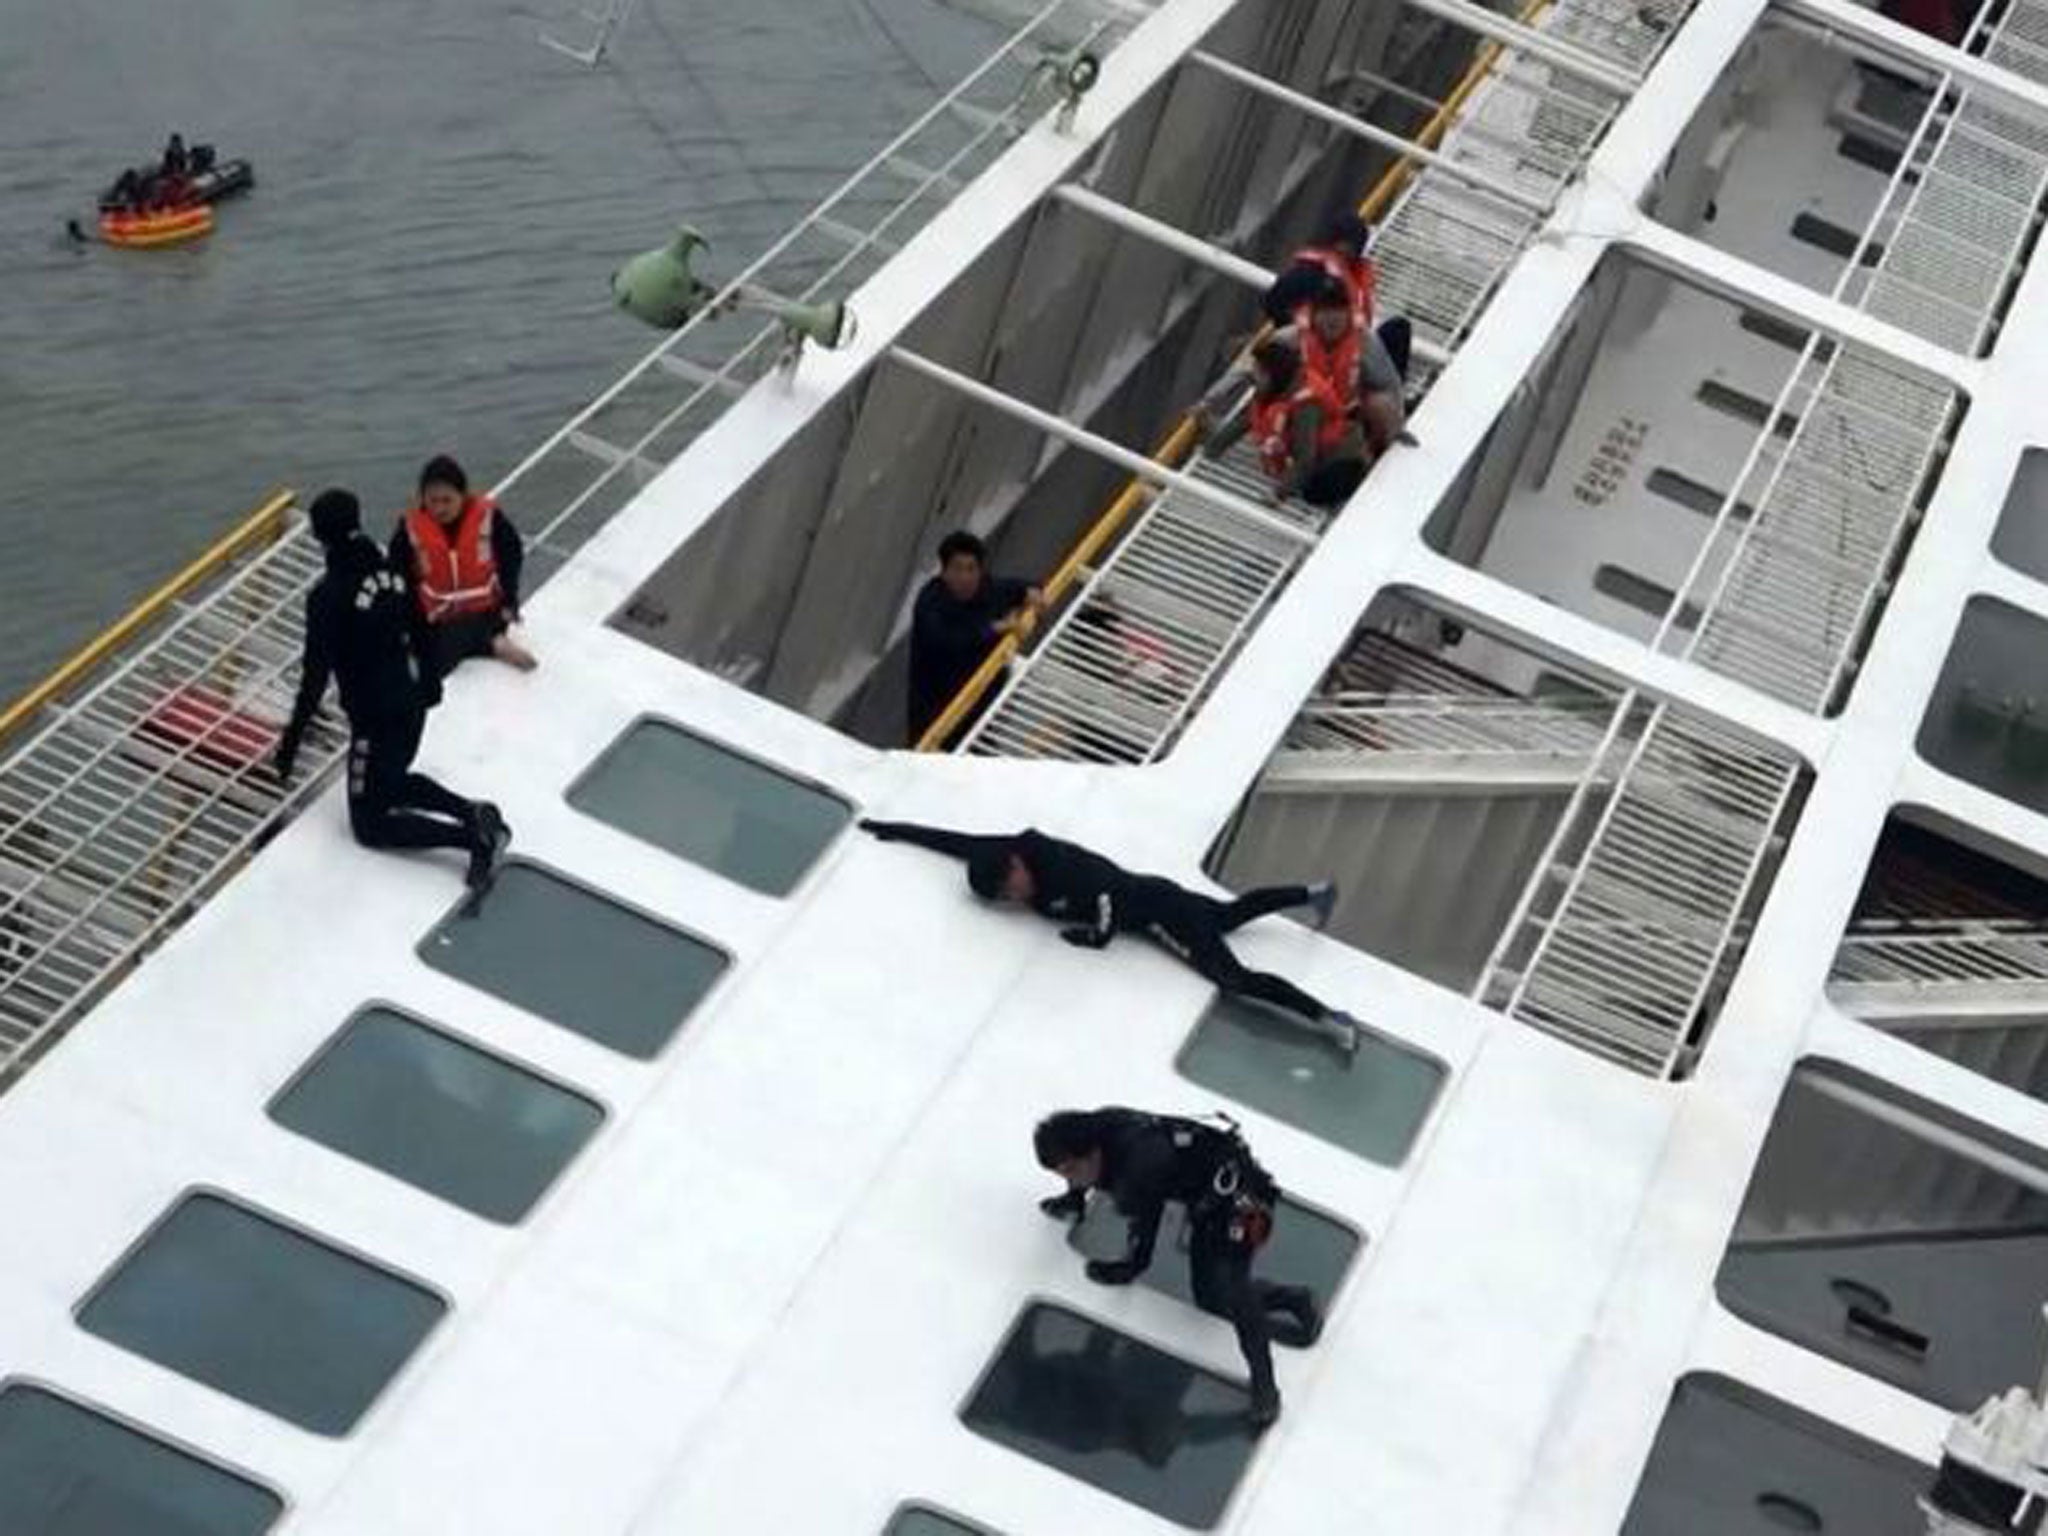 South Korea Ferry Powerful Images Show Dramatic Rescue Operation As Search Continues For 290